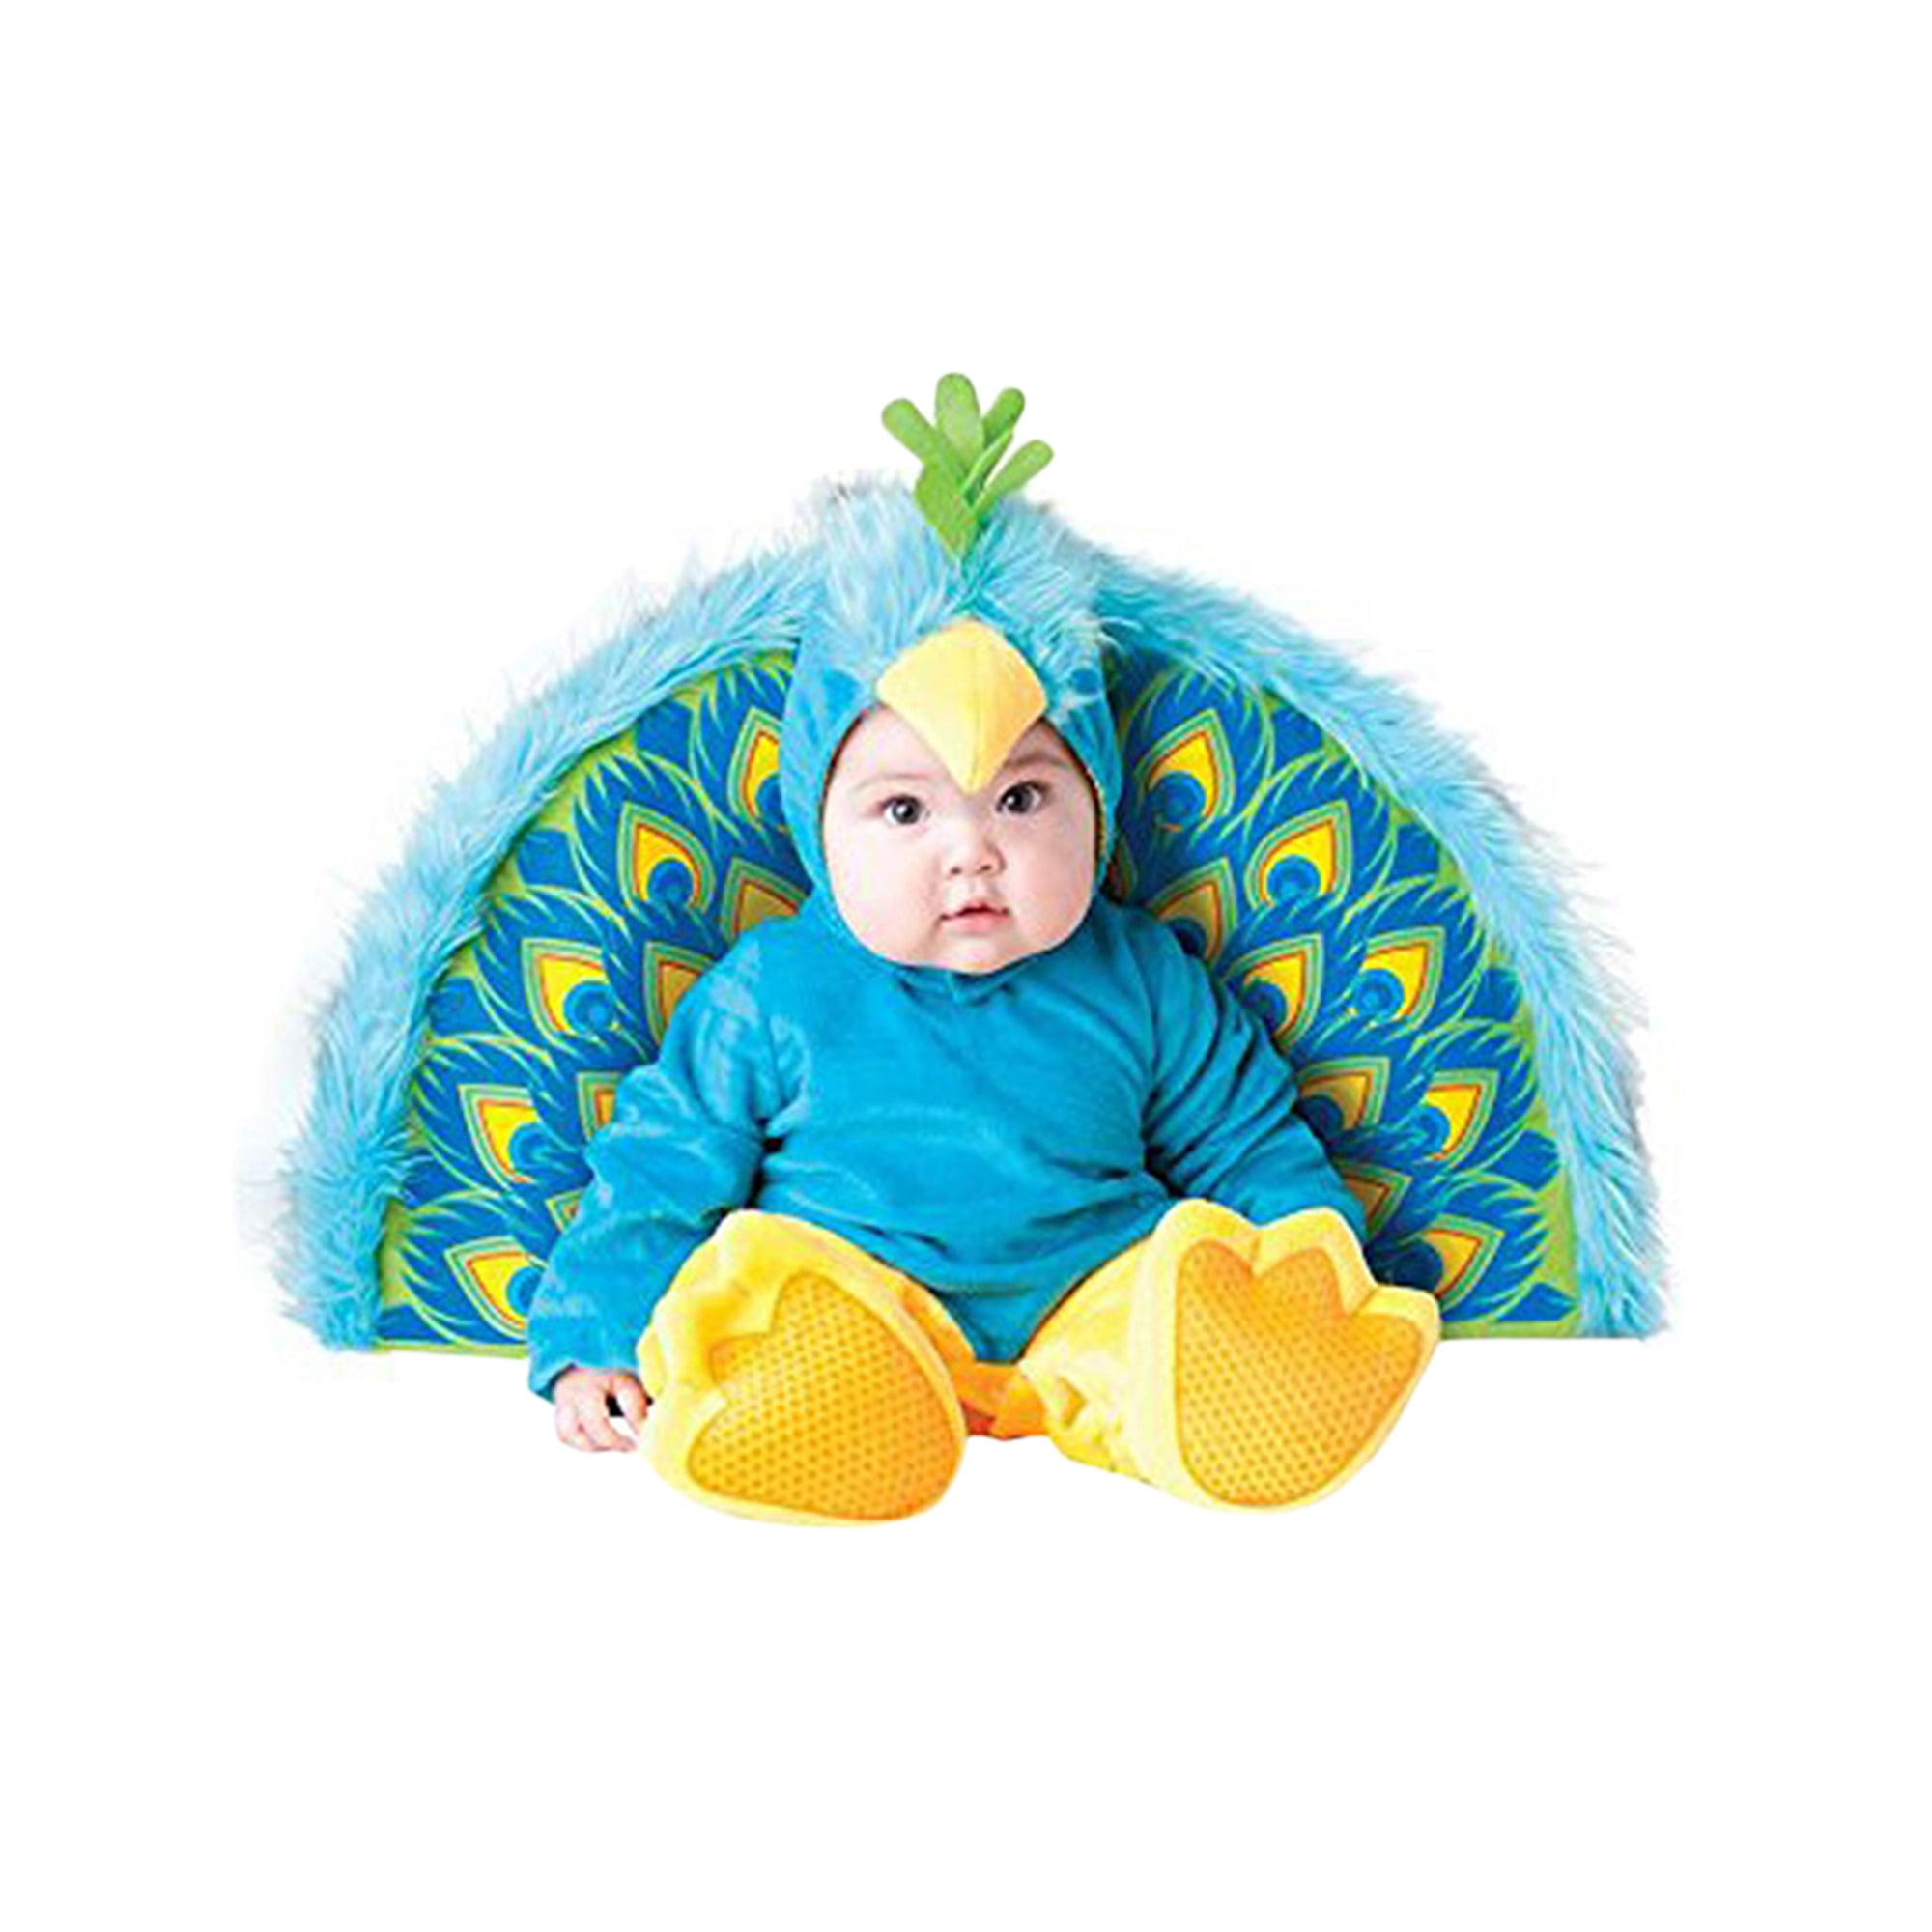 Toddler Baby Deluxe Animal Costume with Hood and Shoe Covers Set -  